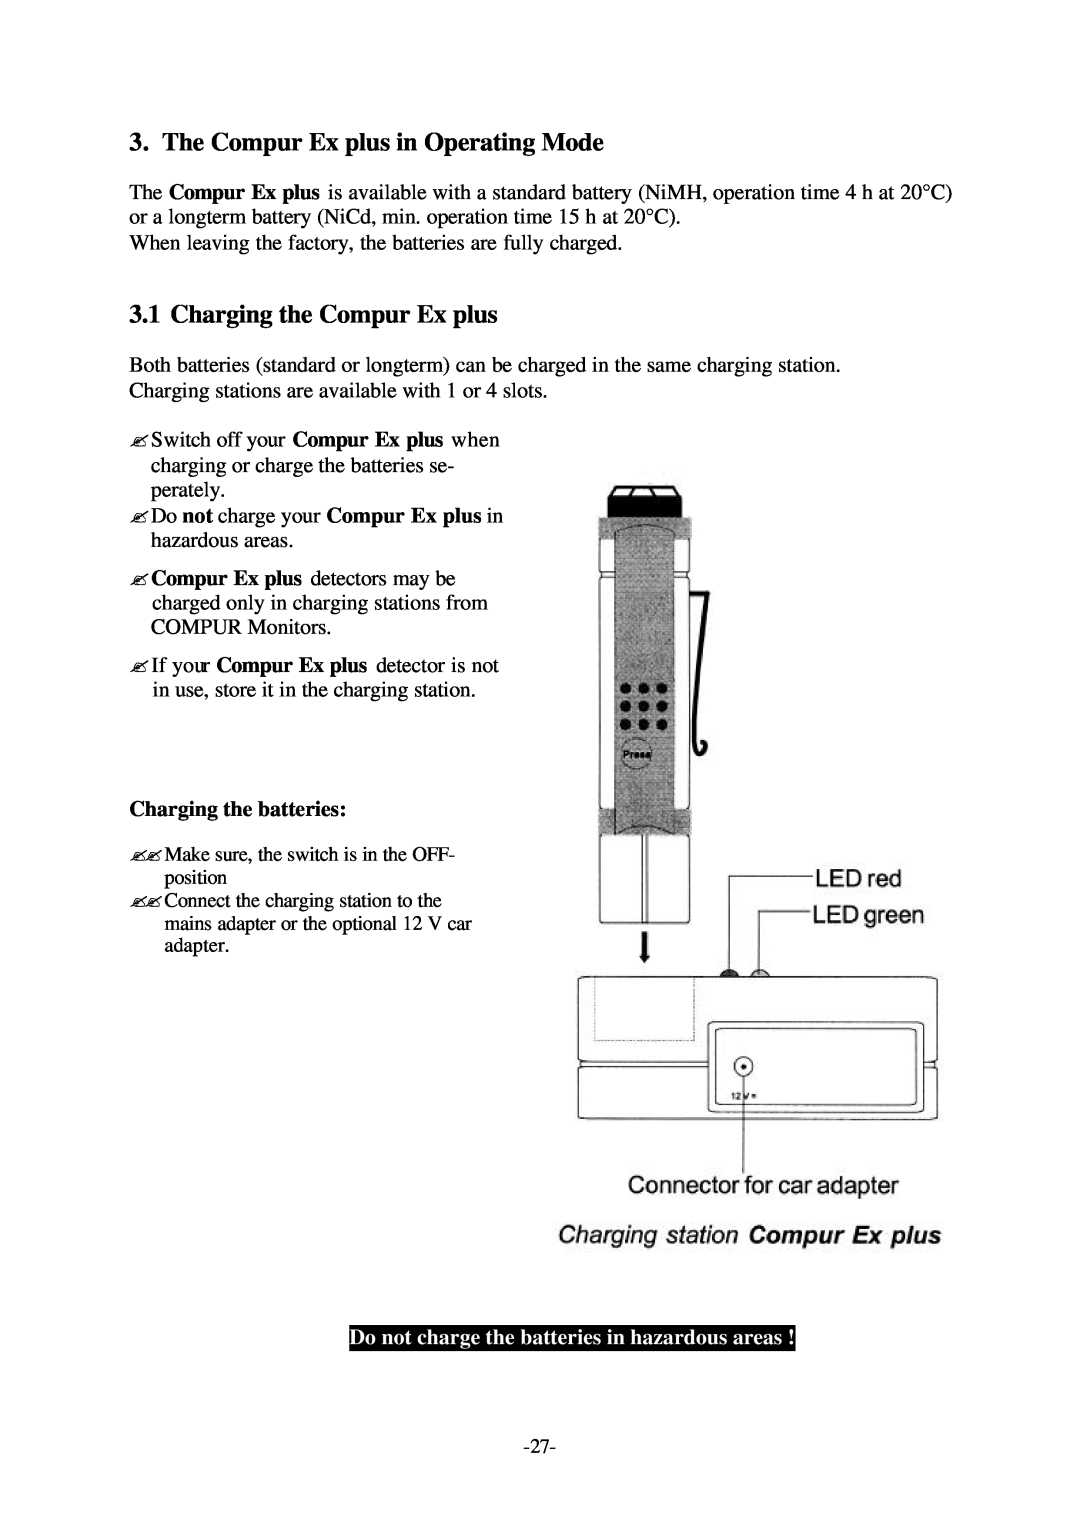 Compur Gas Detector manual The Compur Ex plus in Operating Mode, Charging the Compur Ex plus, Charging the batteries 